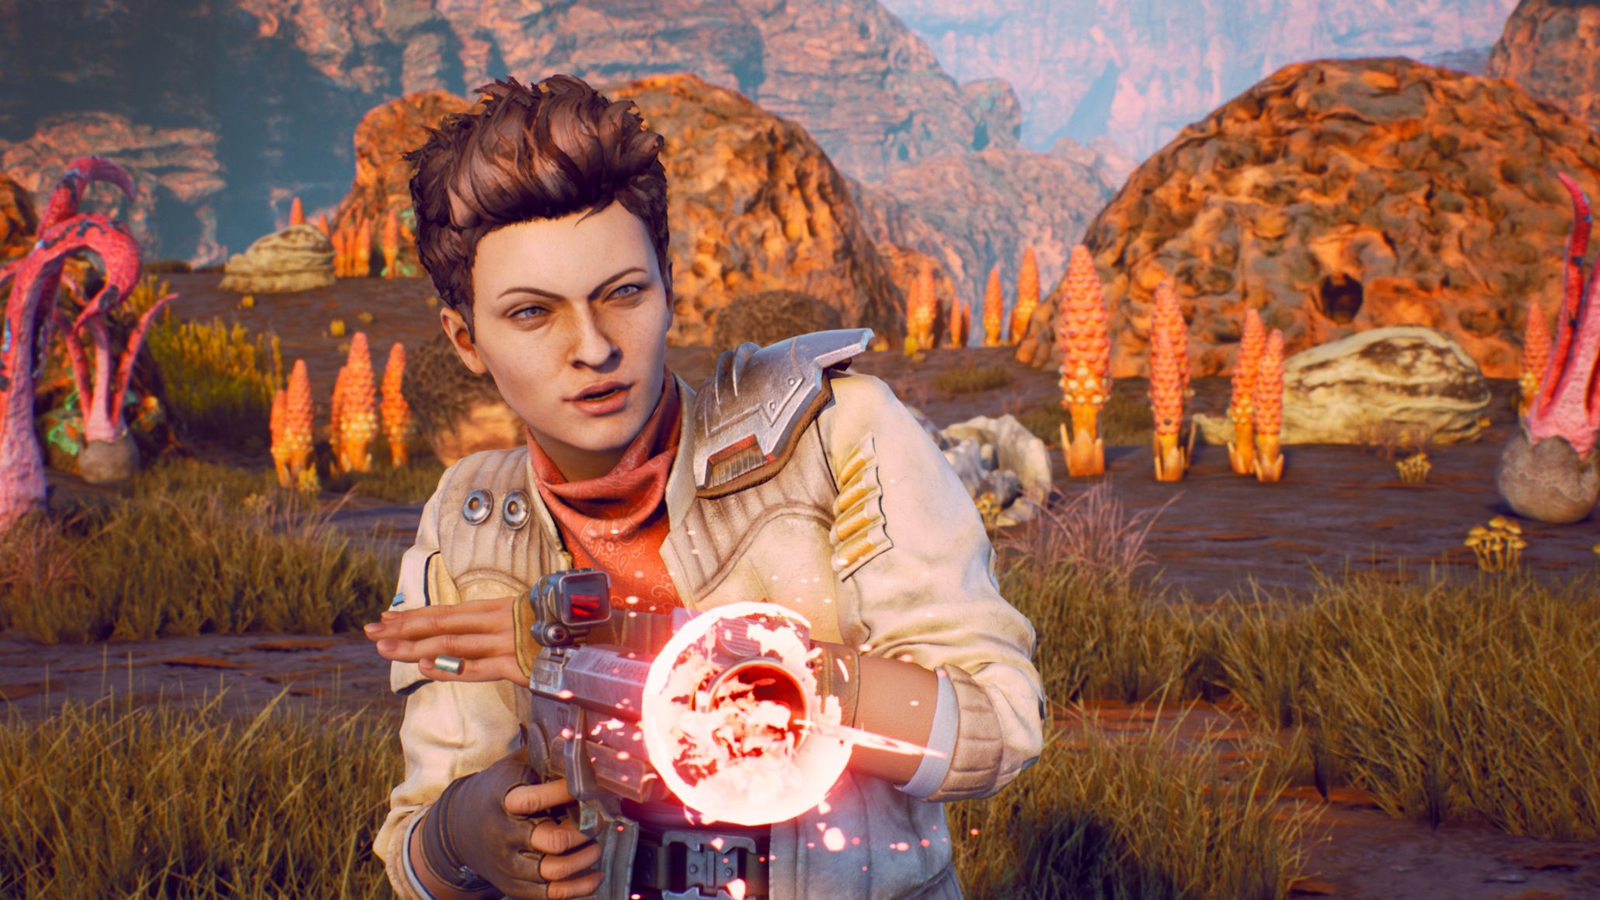 The Outer Worlds PS4/Pro vs Xbox One/X Frame Rate Comparison 